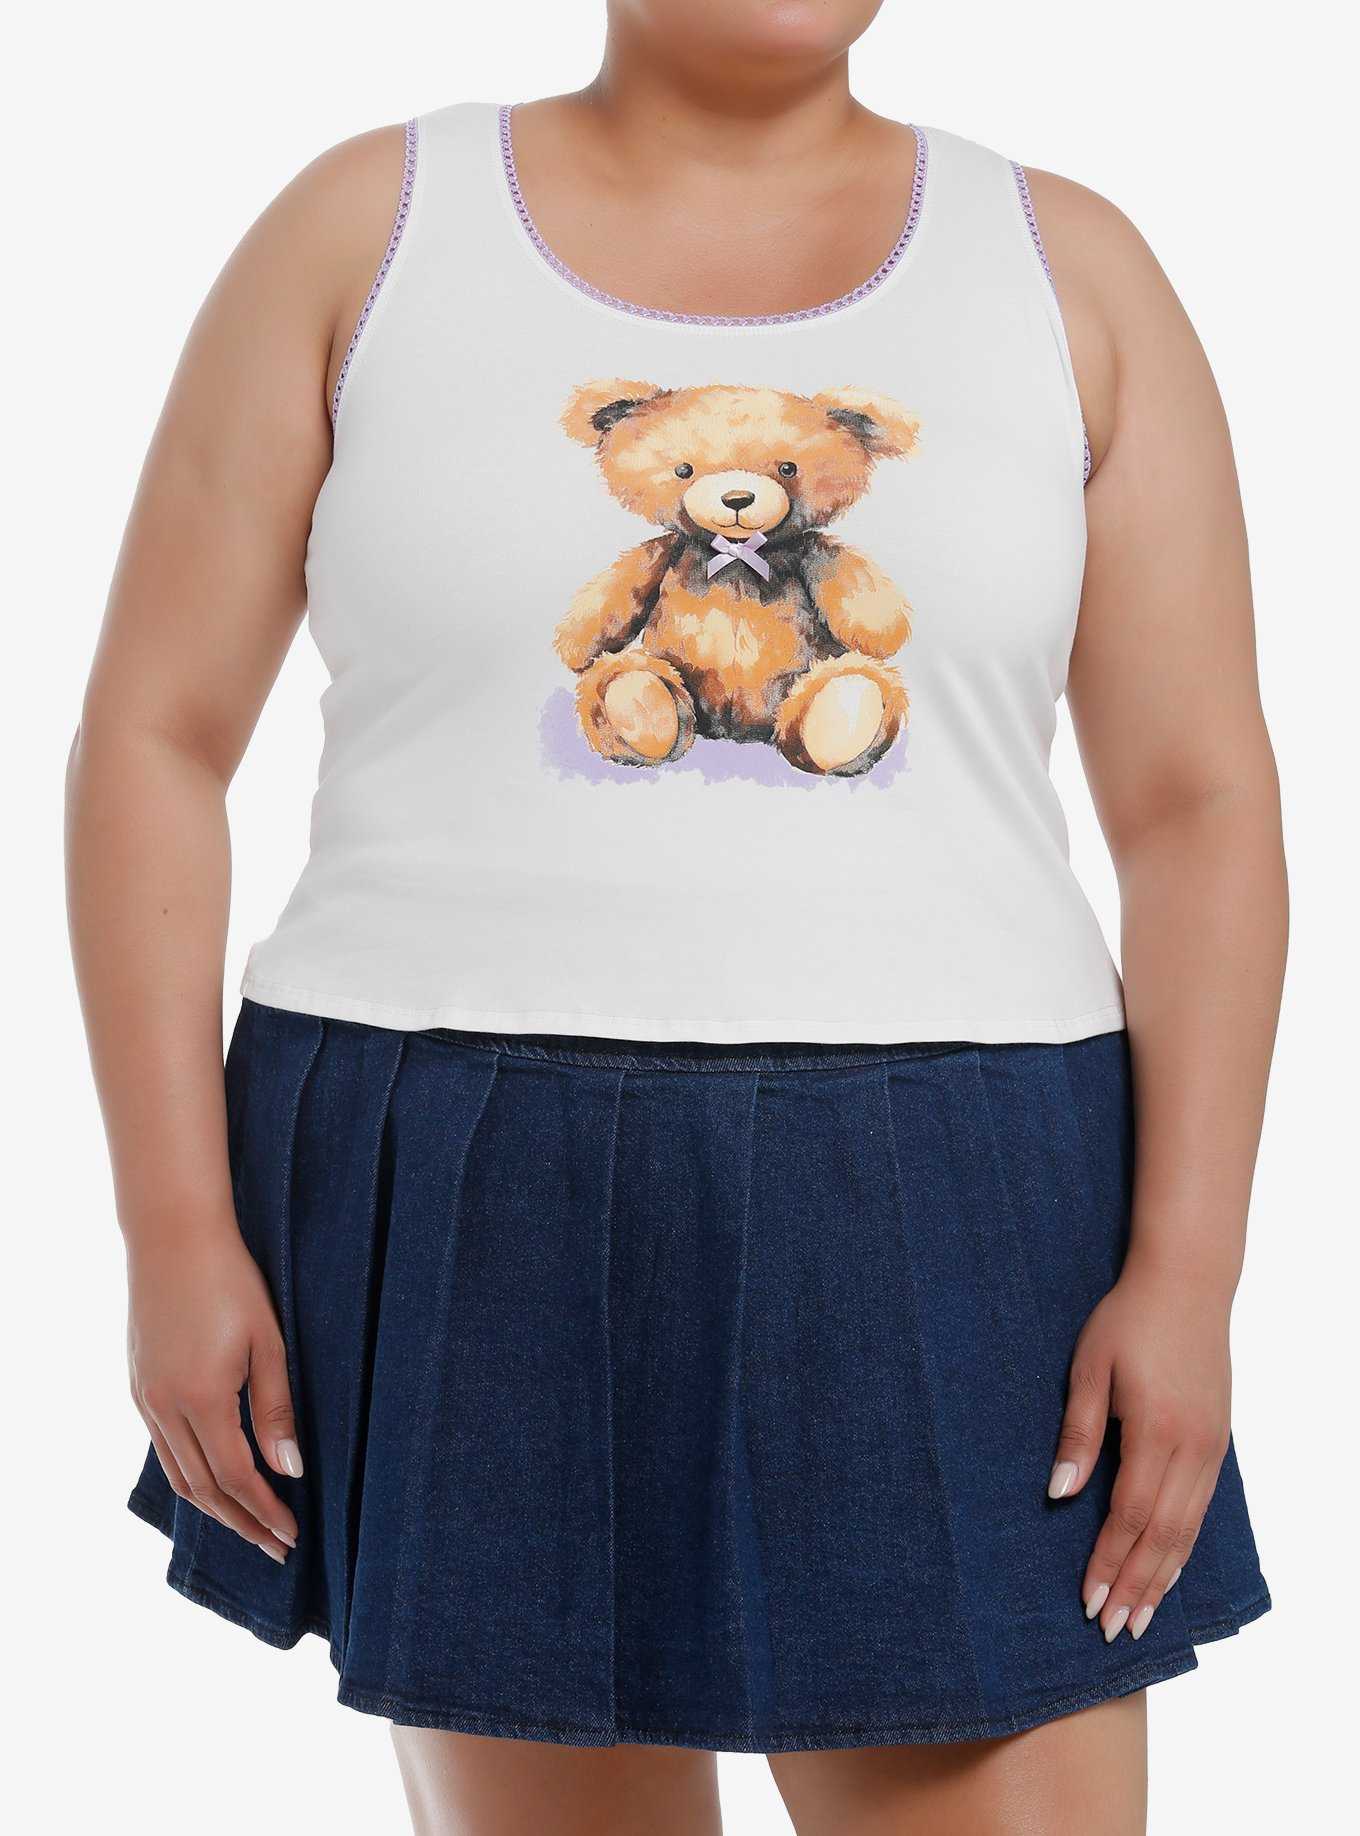 Sweet Society Teddy Bear Lavender Lace Girls Tank Top Plus Size, , hi-res